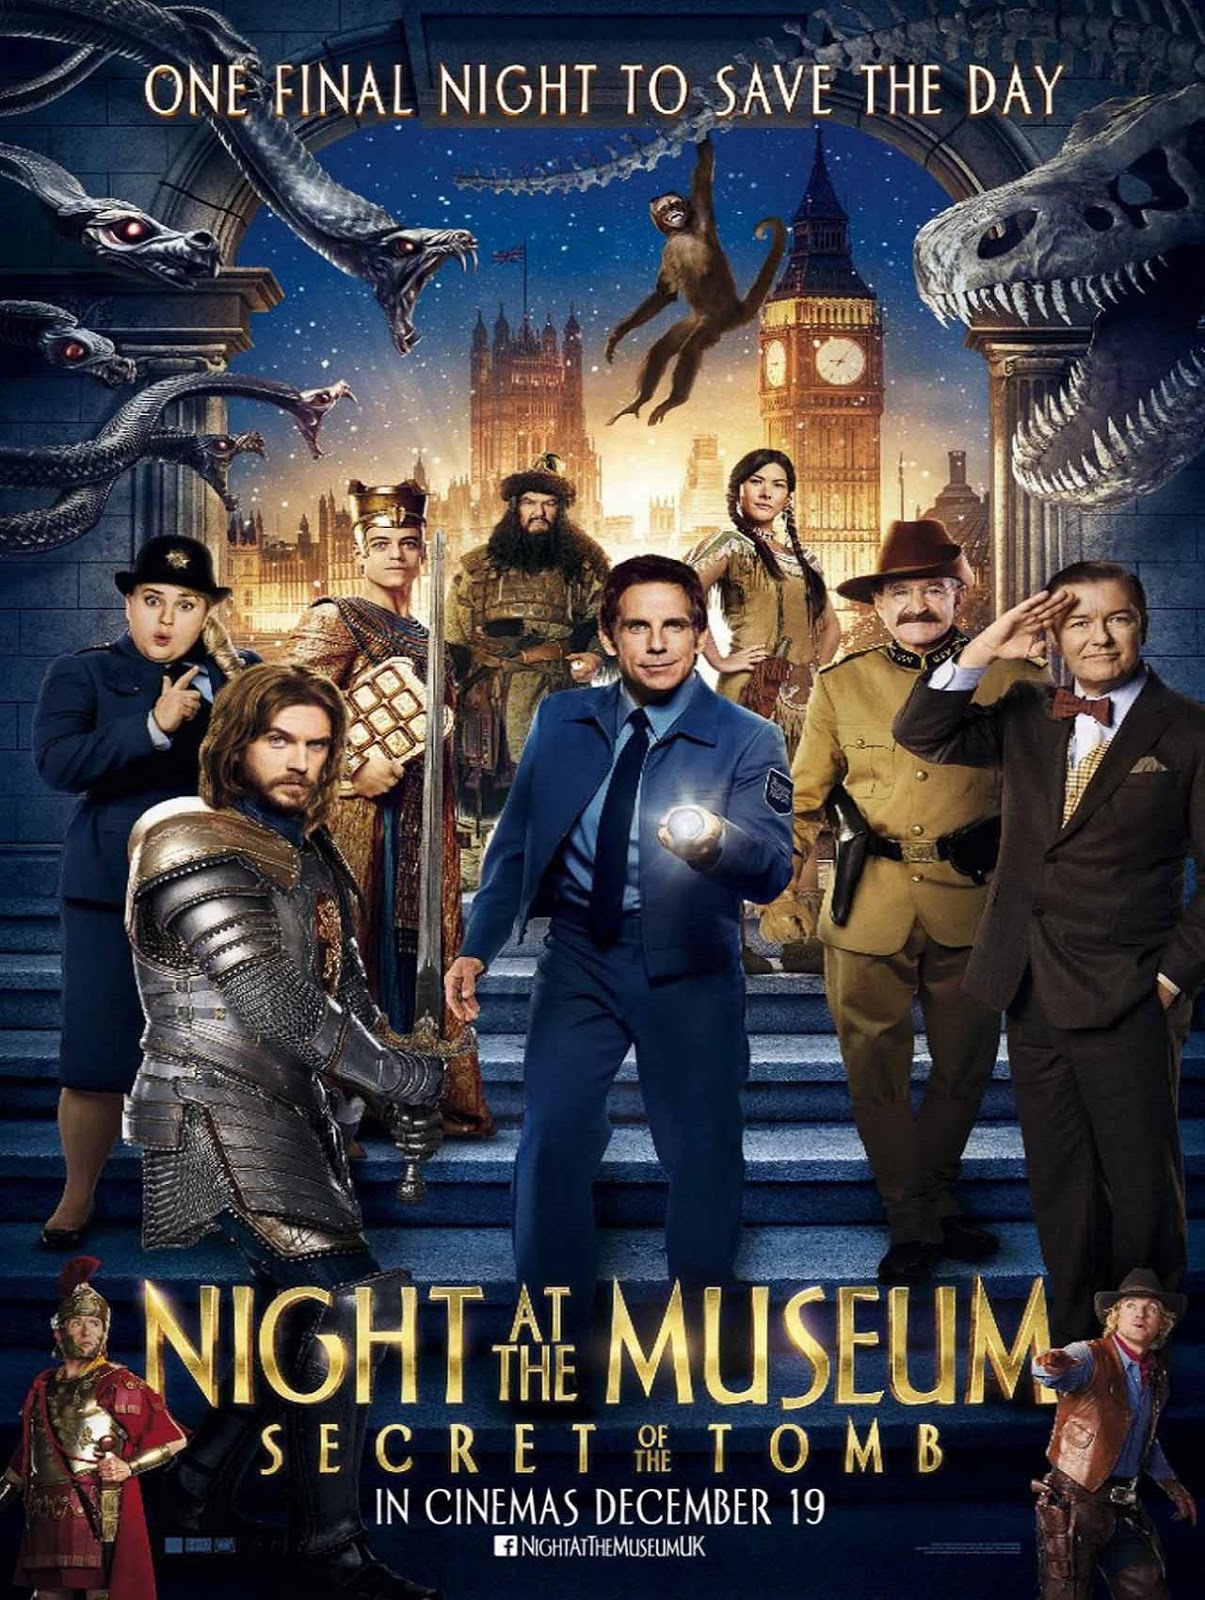 Night at the museum 3 secret of the tomb in hindi download